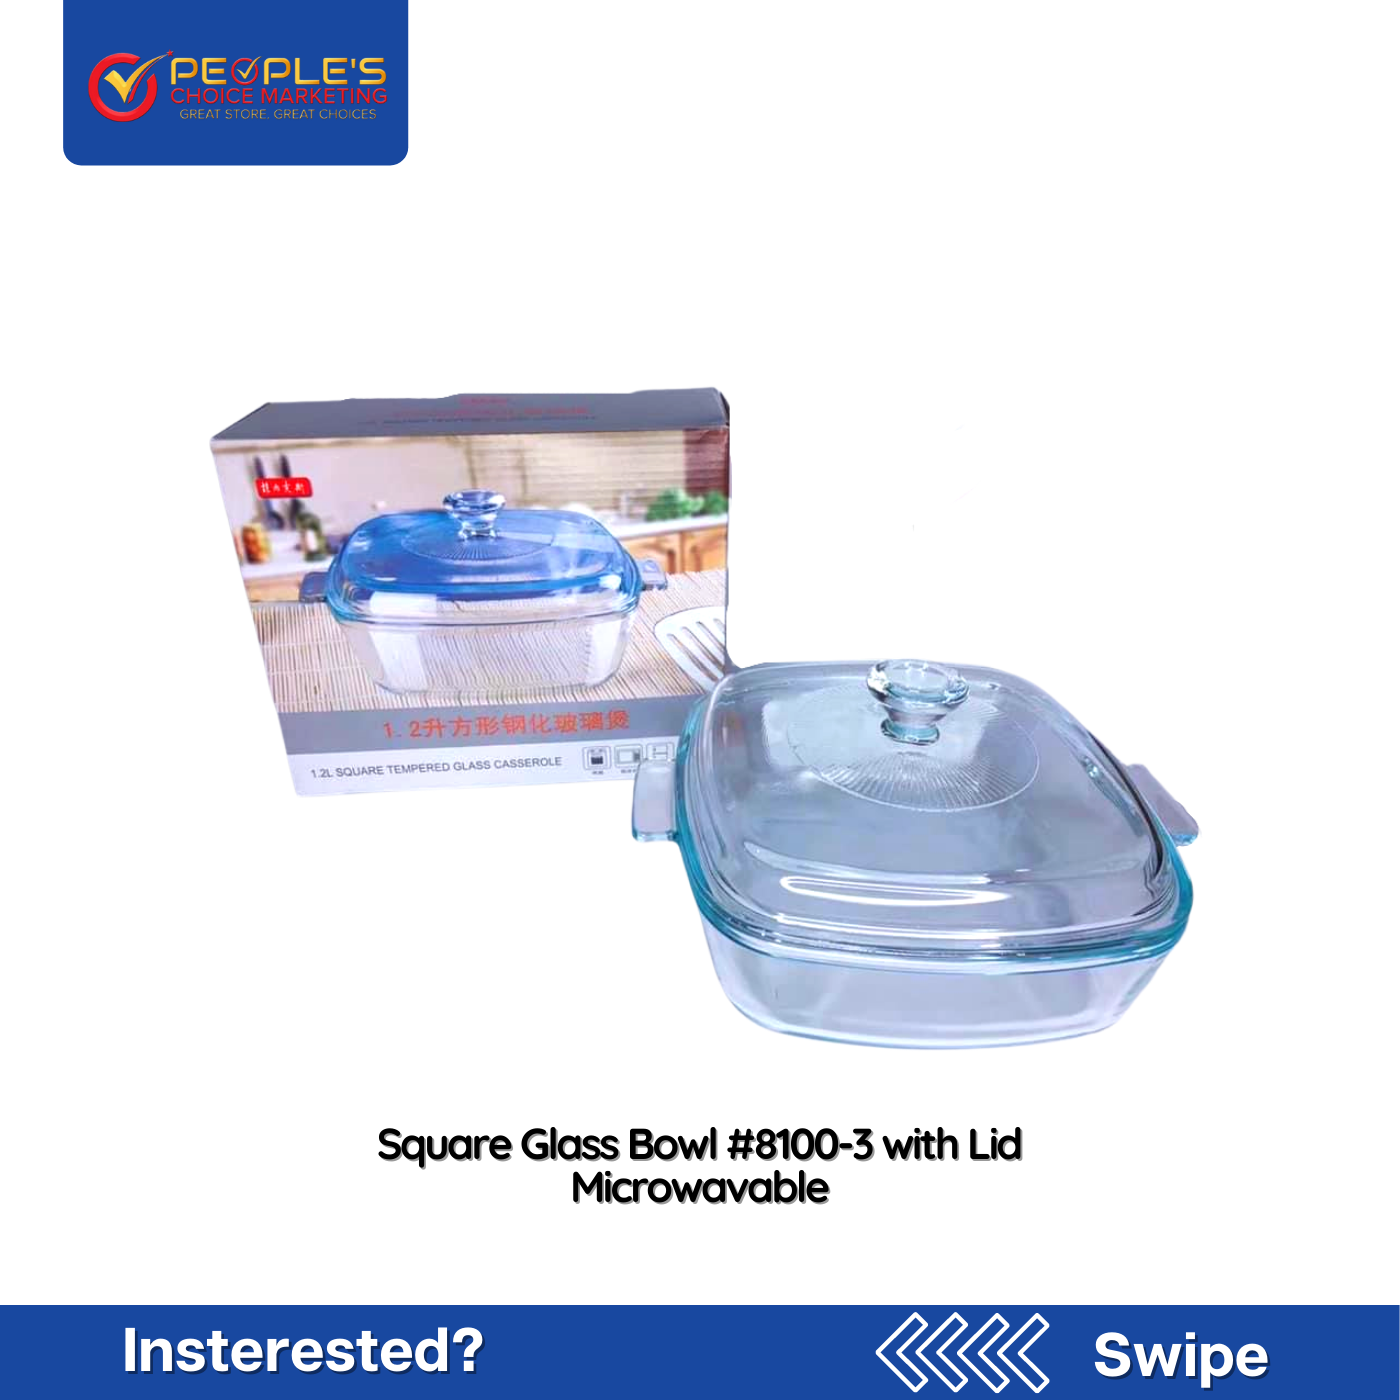 Square Glass Bowl with Lid #8100-3 Microwavable